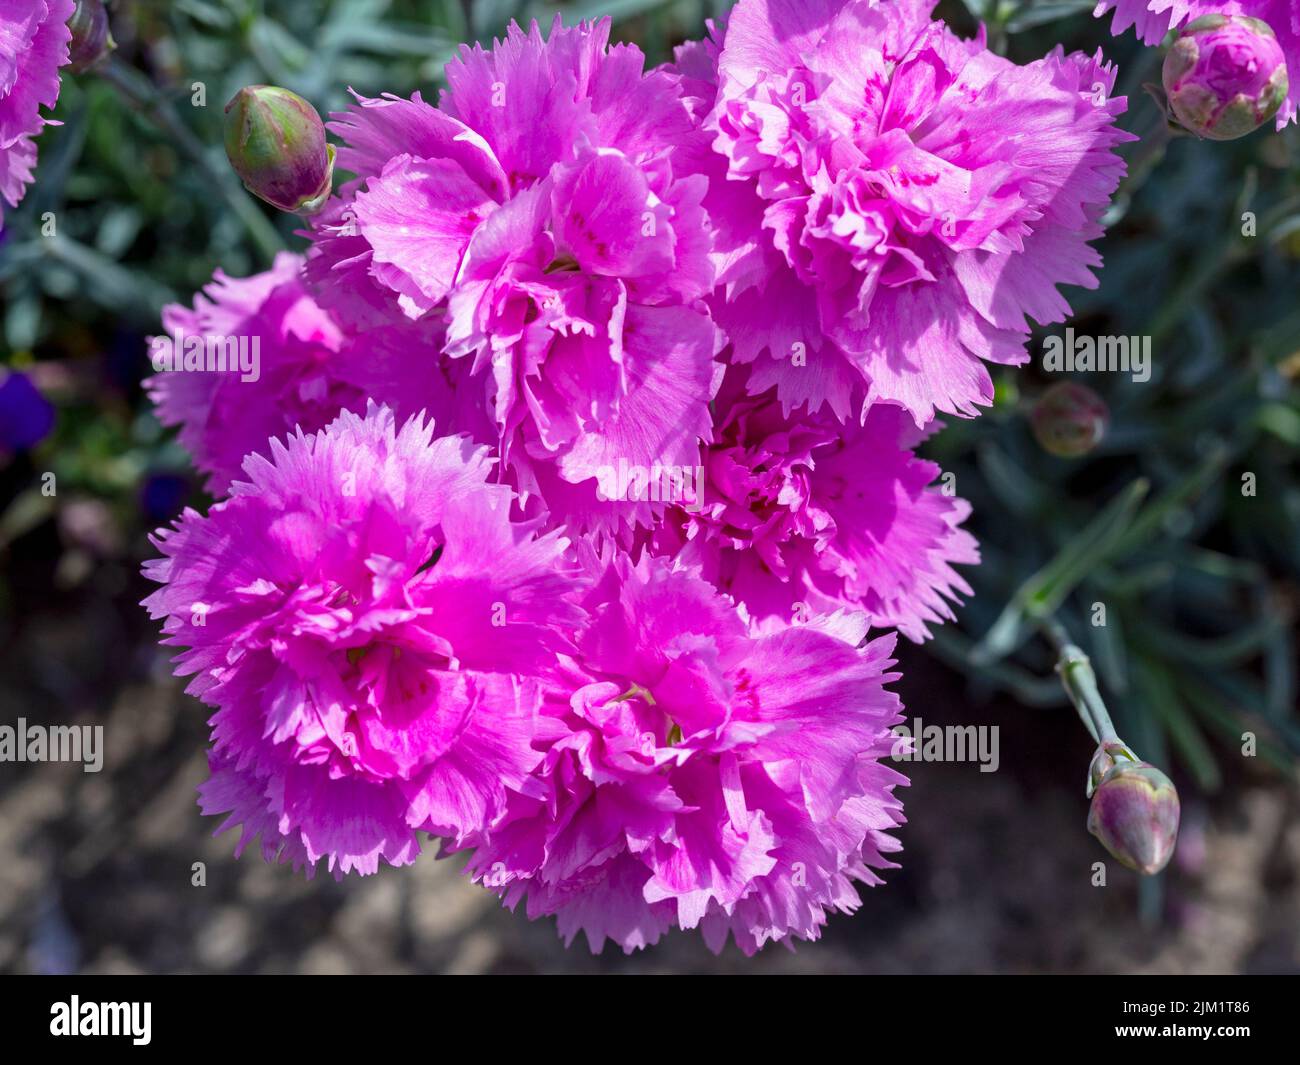 Closeup of pretty pink carnation flowers in a garden Stock Photo